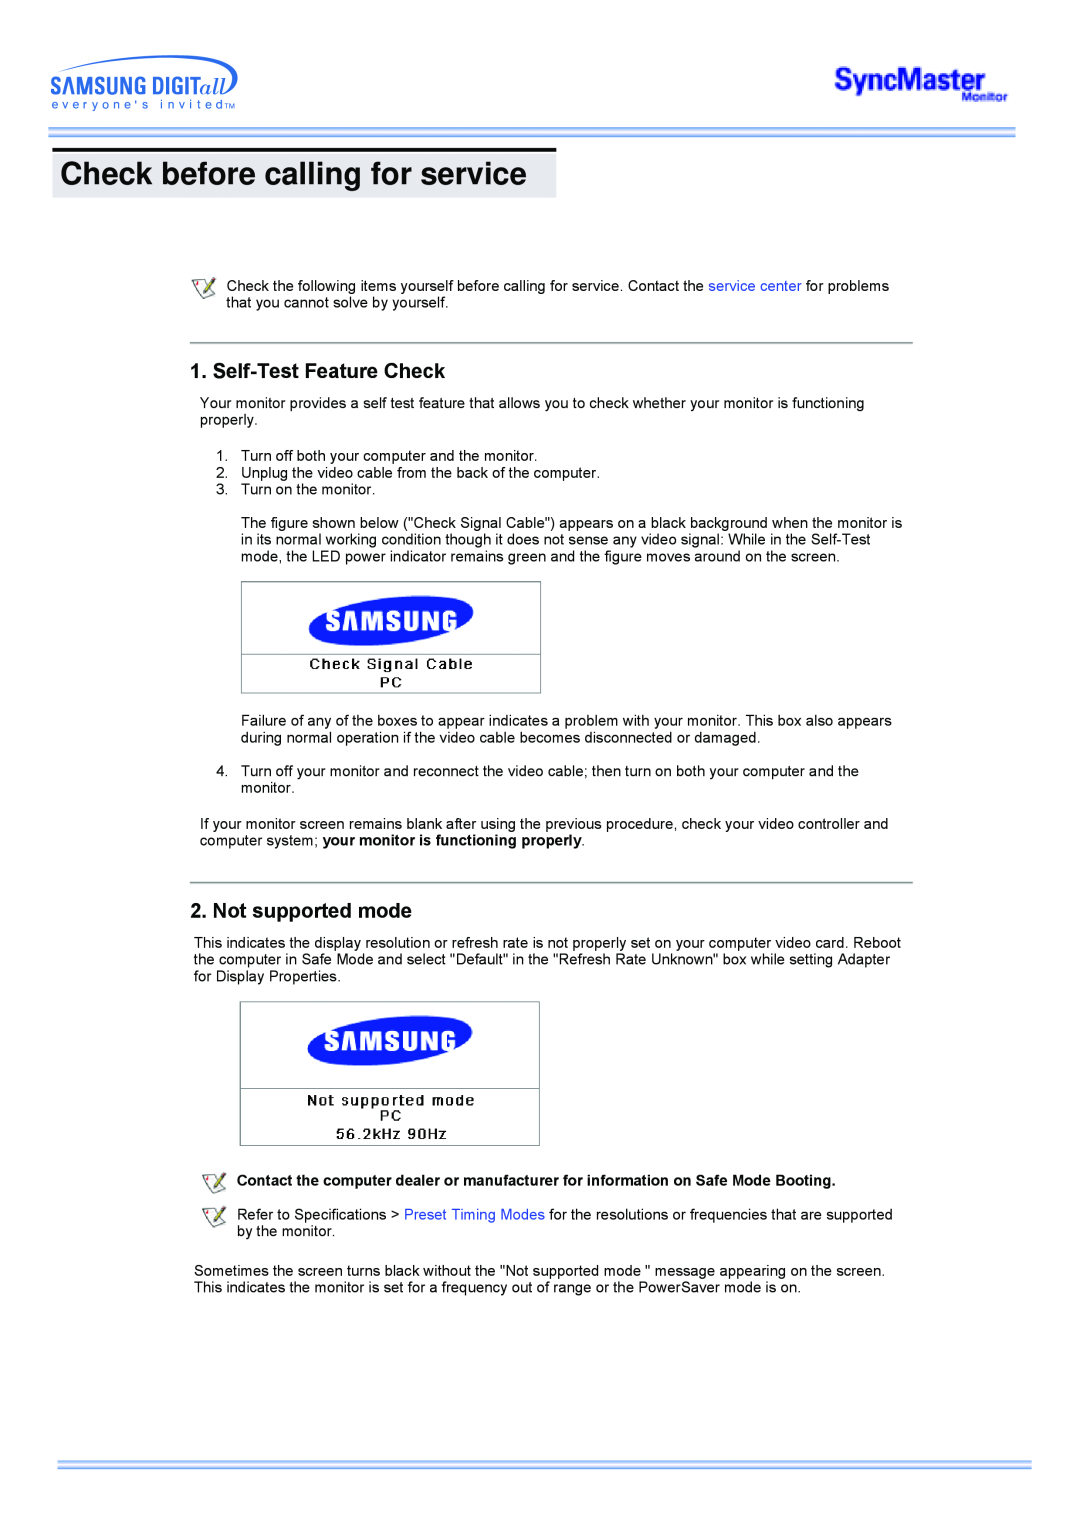 Samsung 173MP manual Check before calling for service, Self-Test Feature Check, Not supported mode 